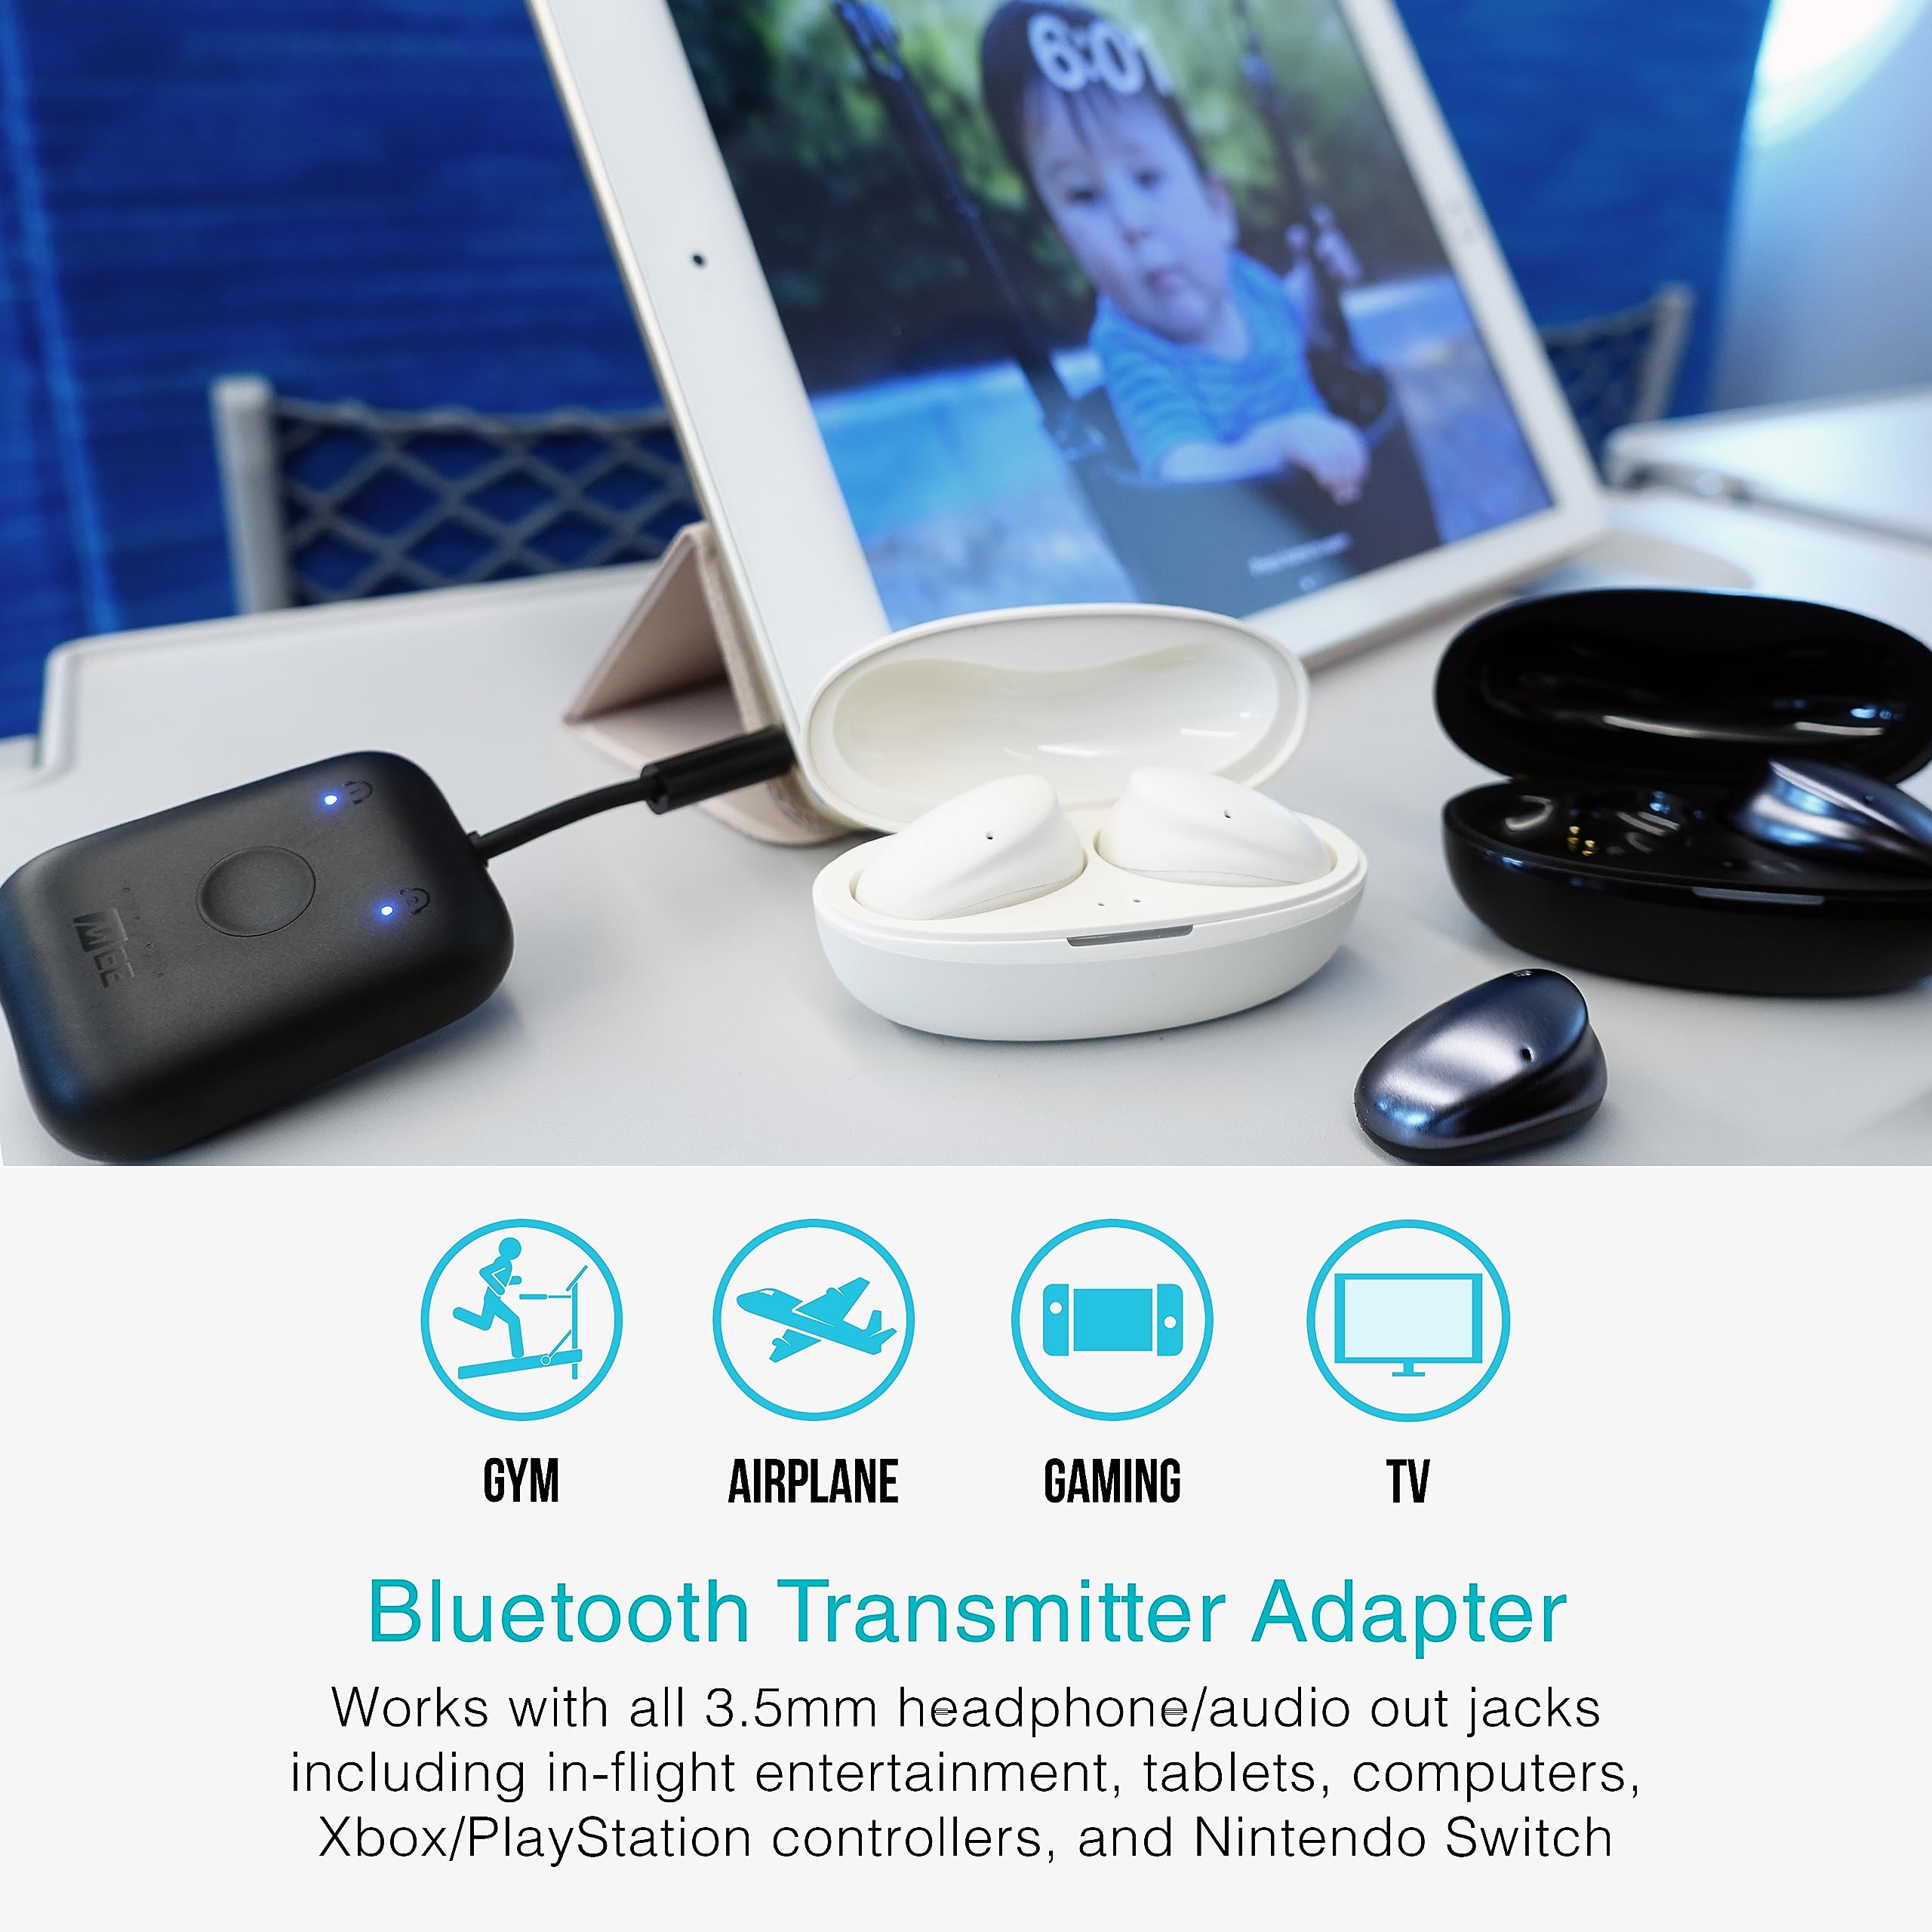 MEE audio Connect Air (2 PACK) in-Flight Bluetooth Wireless Audio Transmitter Adapter for up to 2 AirPods/Other Headphones; Works with All 3.5mm Aux Jacks on Airplanes, Gym, TVs, & Gaming, Black&White